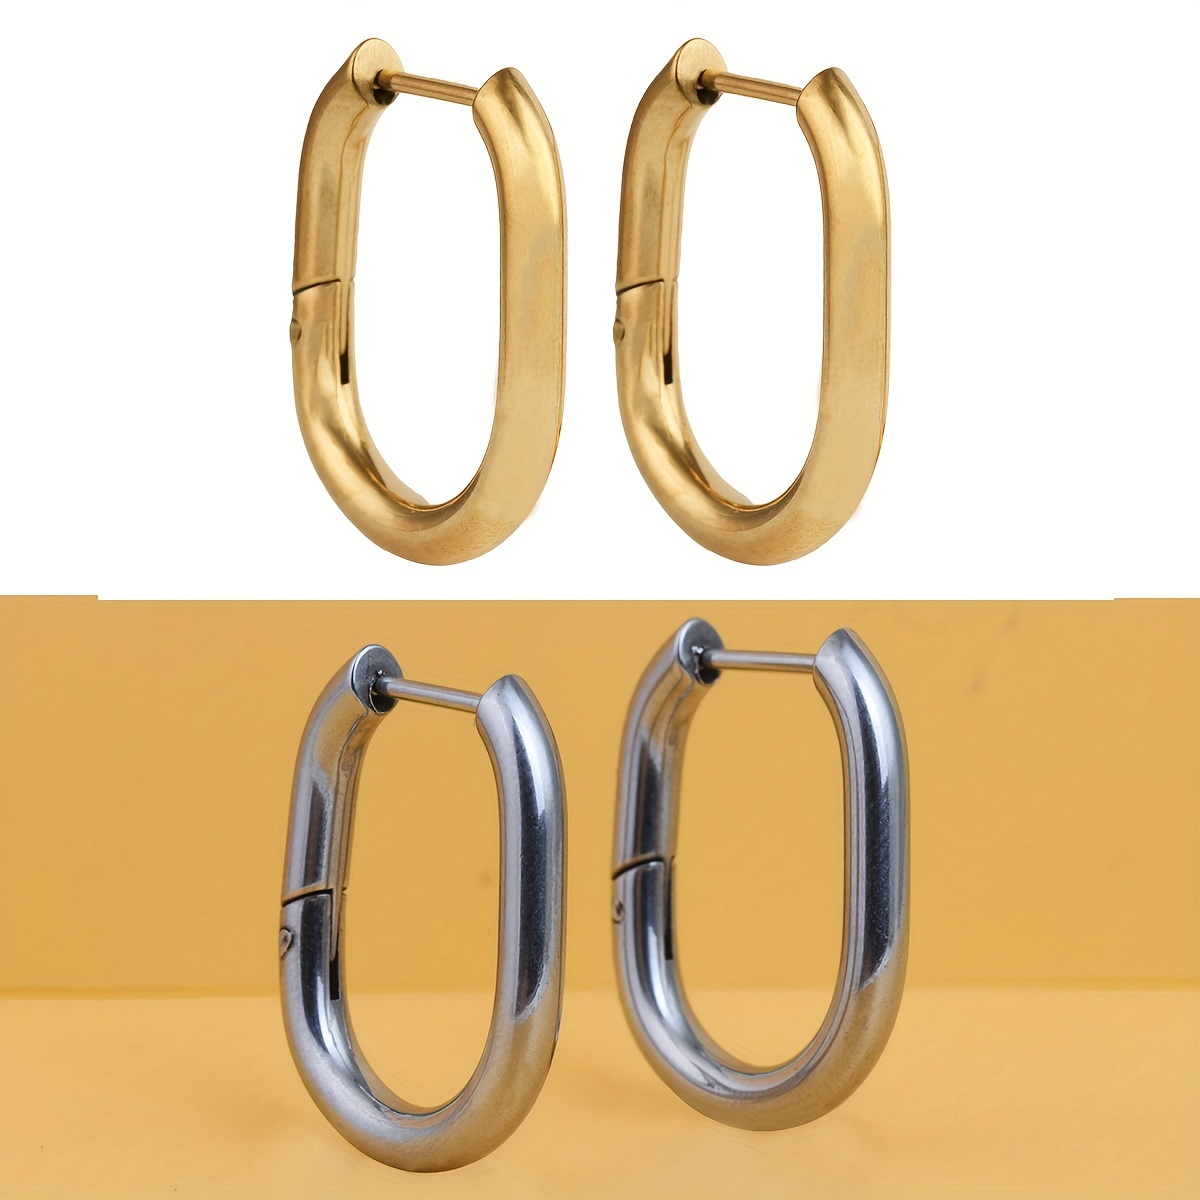 

Smooth Oval Shaped Hoop Earrings Stainless Steel 18k Plated Jewelry Vintage Elegant Style Suitable For Women Daily Wear